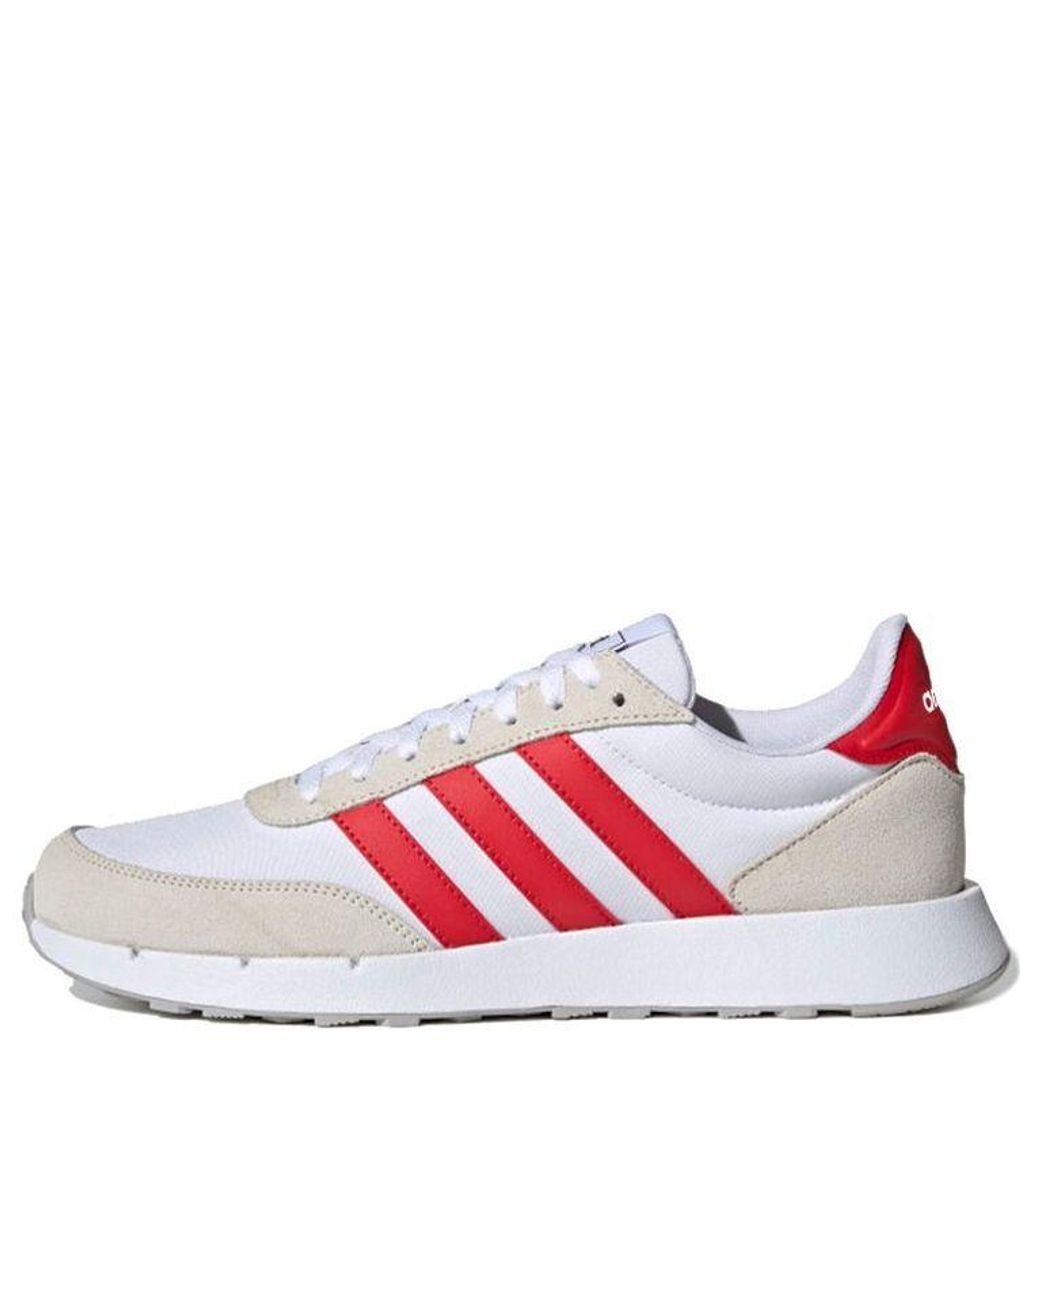 Adidas Neo Run 60s 2.0 Shoes White/red for Men | Lyst